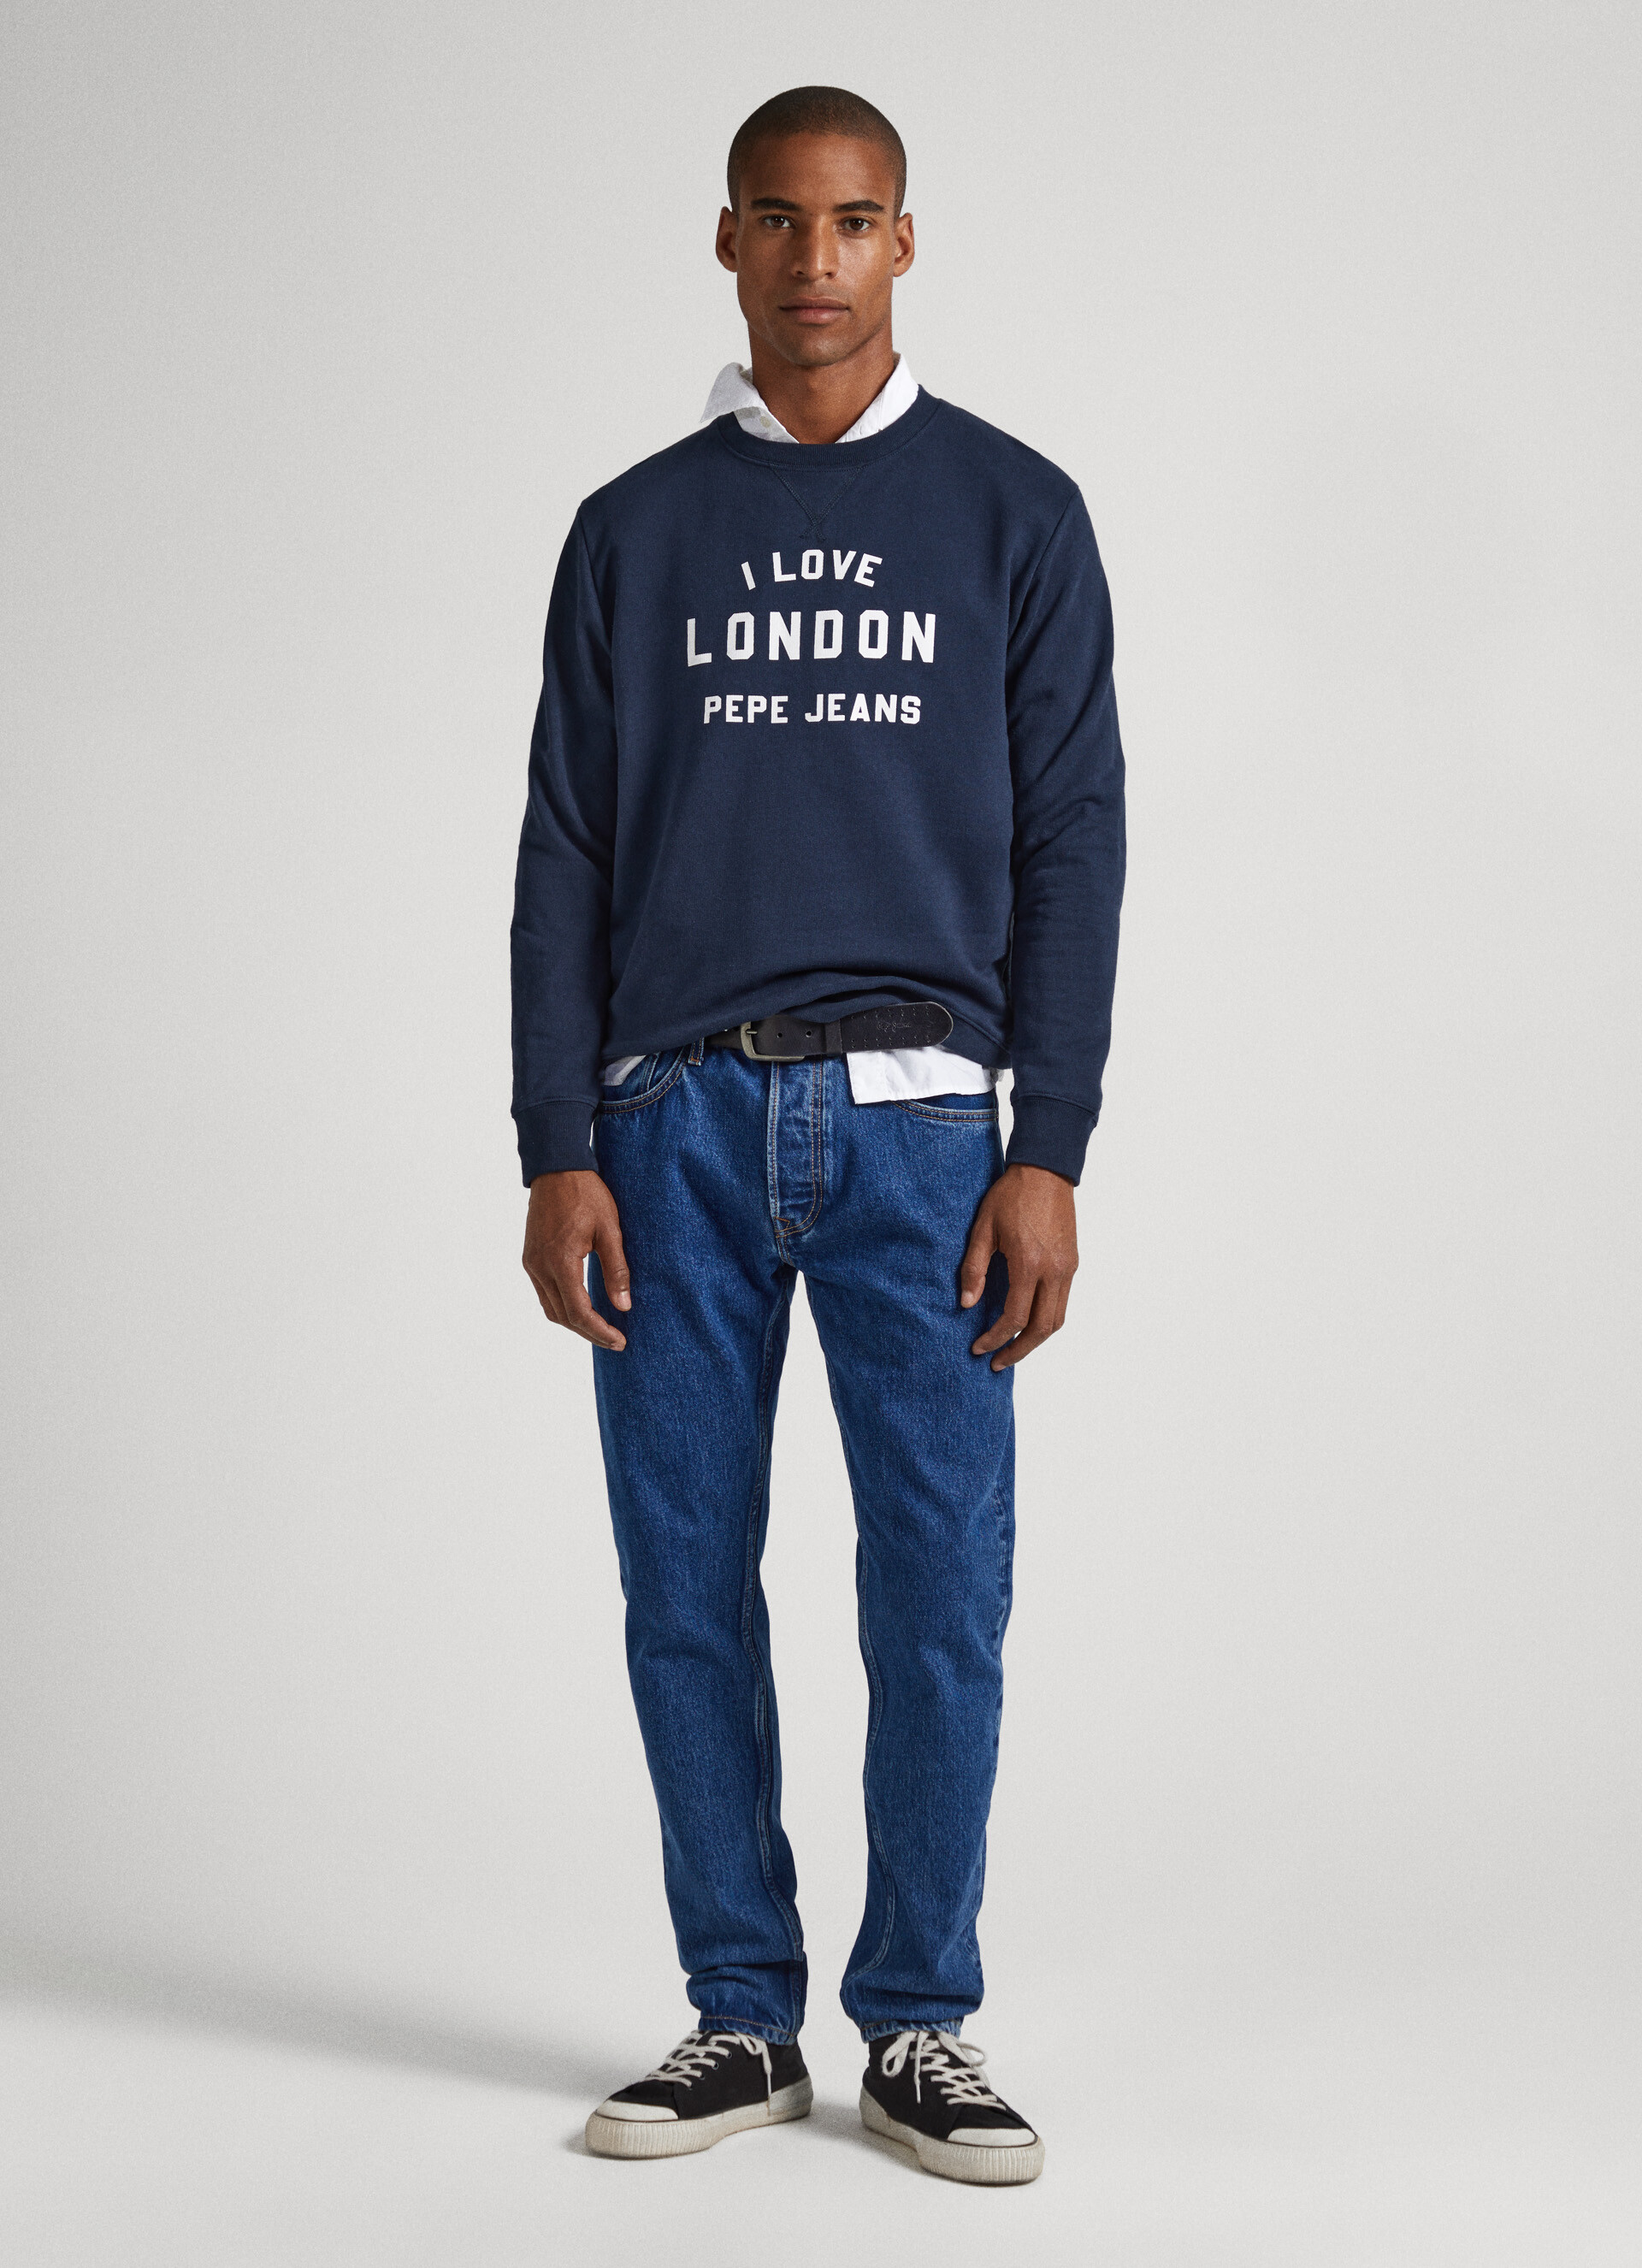 I Love London Tapered Fit Jeans | Pepe Jeans